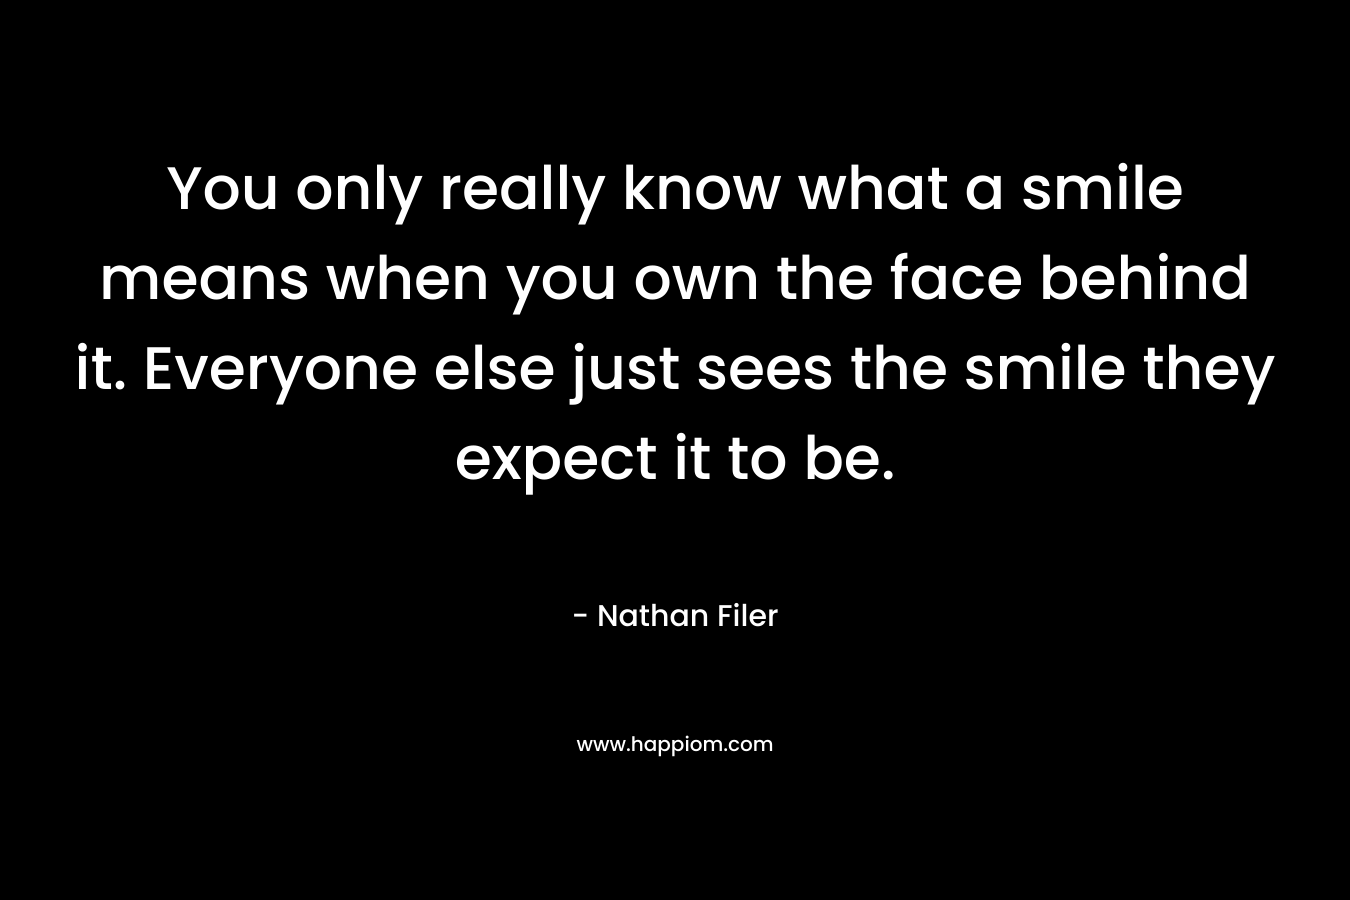 You only really know what a smile means when you own the face behind it. Everyone else just sees the smile they expect it to be. – Nathan Filer